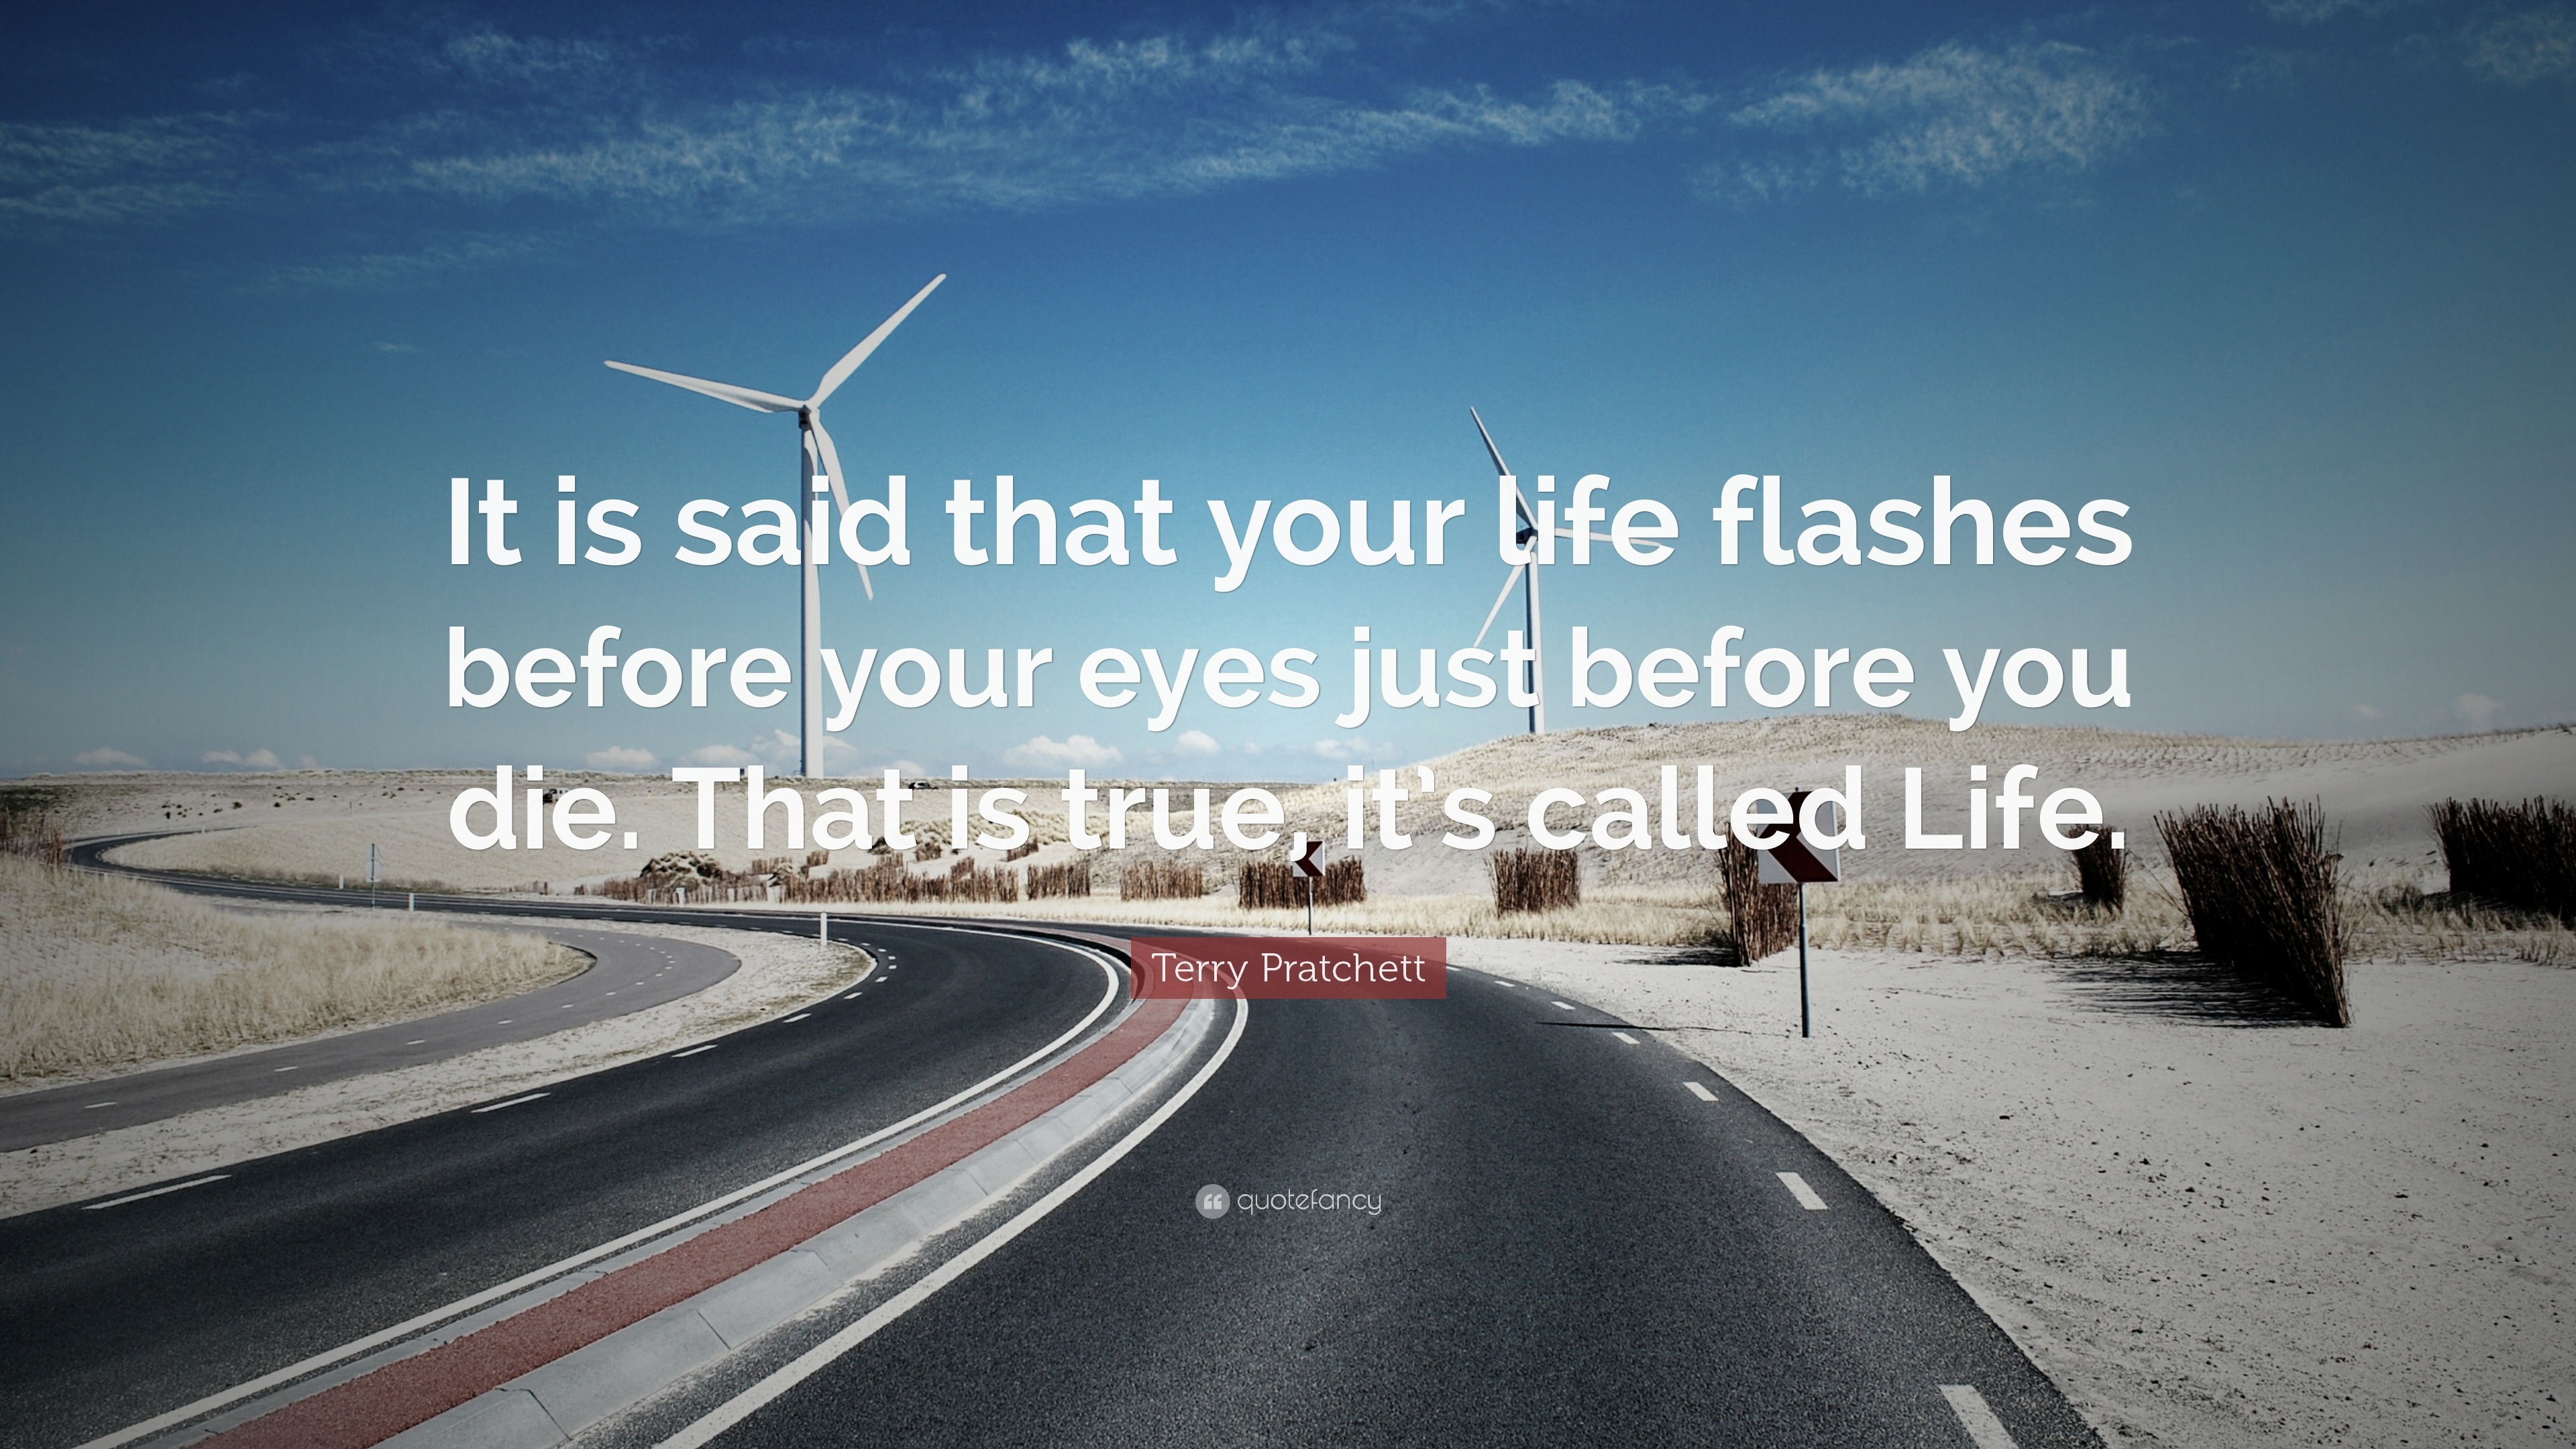 whne your life flashes before your eyes